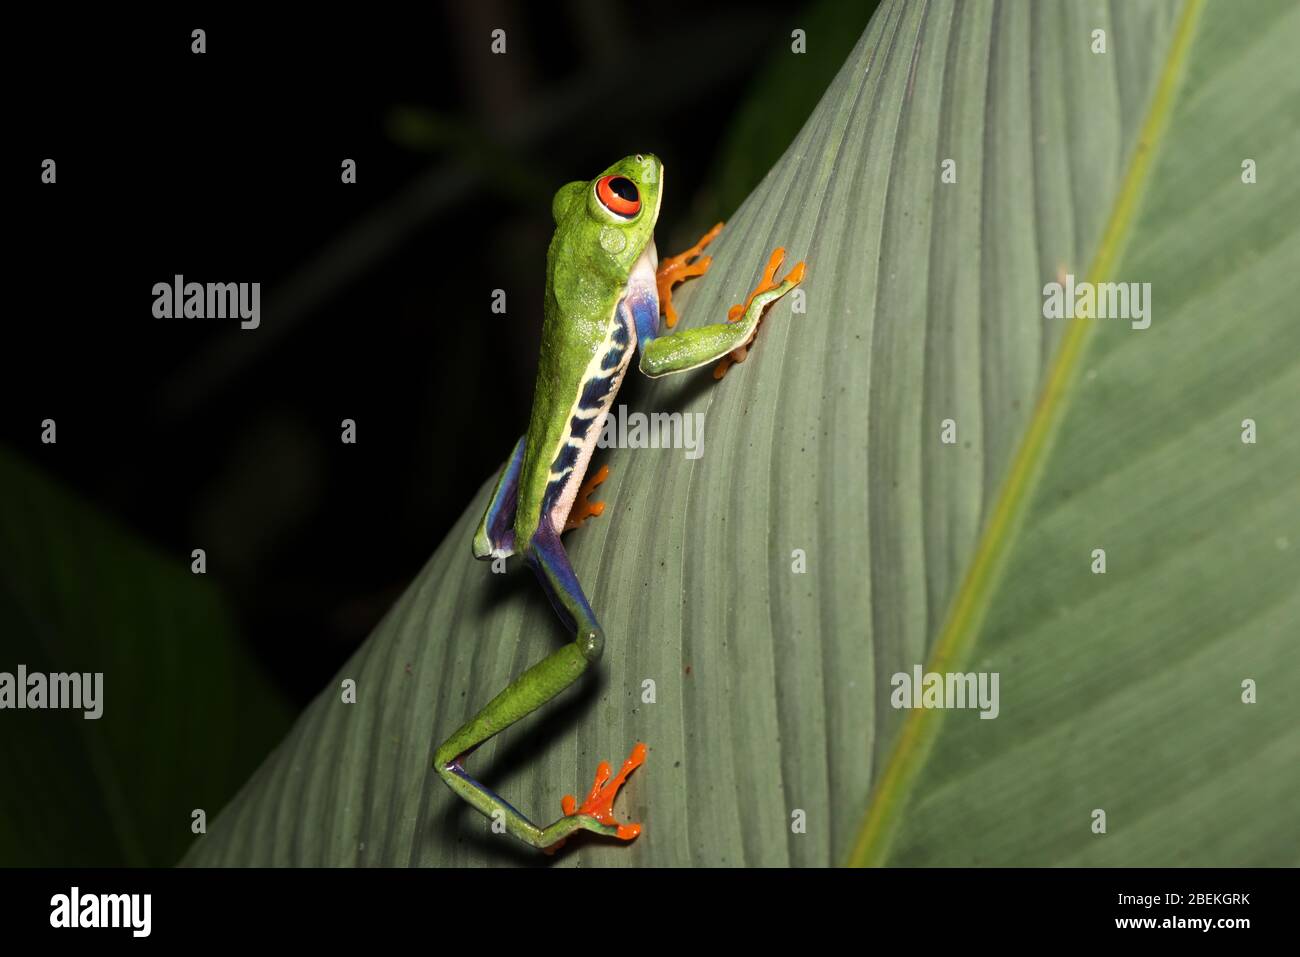 Night photography of a Red-eyed tree frog or leaf frog, or Gaudy Leaf Frog (Agalychnis callidryas)  posing on a stem of a tropical plant. Costa Rica. Stock Photo